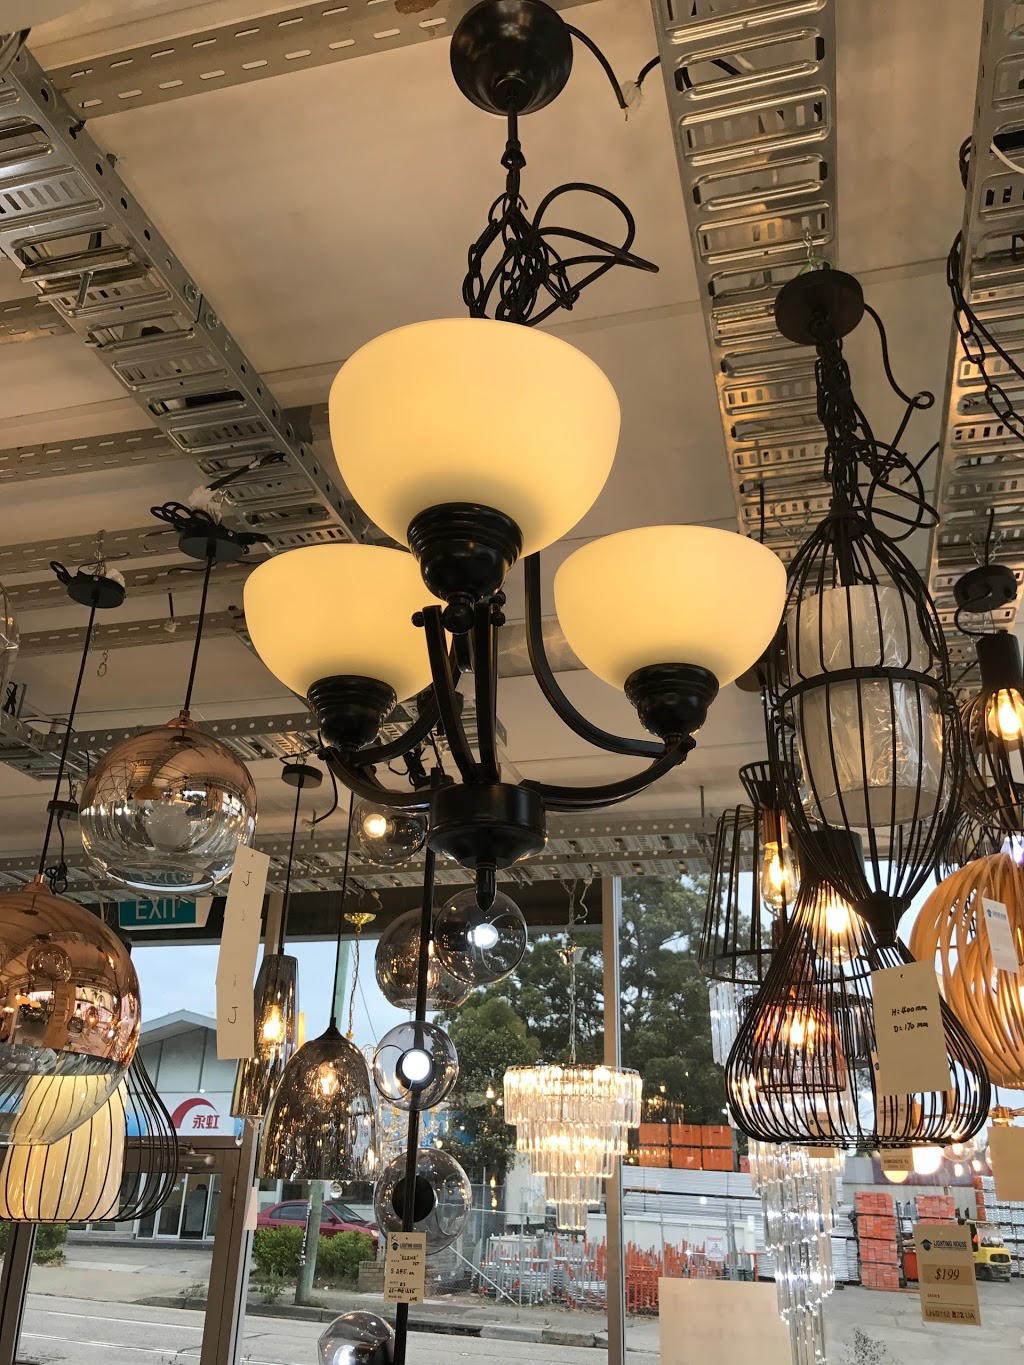 Lighting House | home goods store | 1/818 Canterbury Rd, Roselands NSW 2196, Australia | 0297582050 OR +61 2 9758 2050